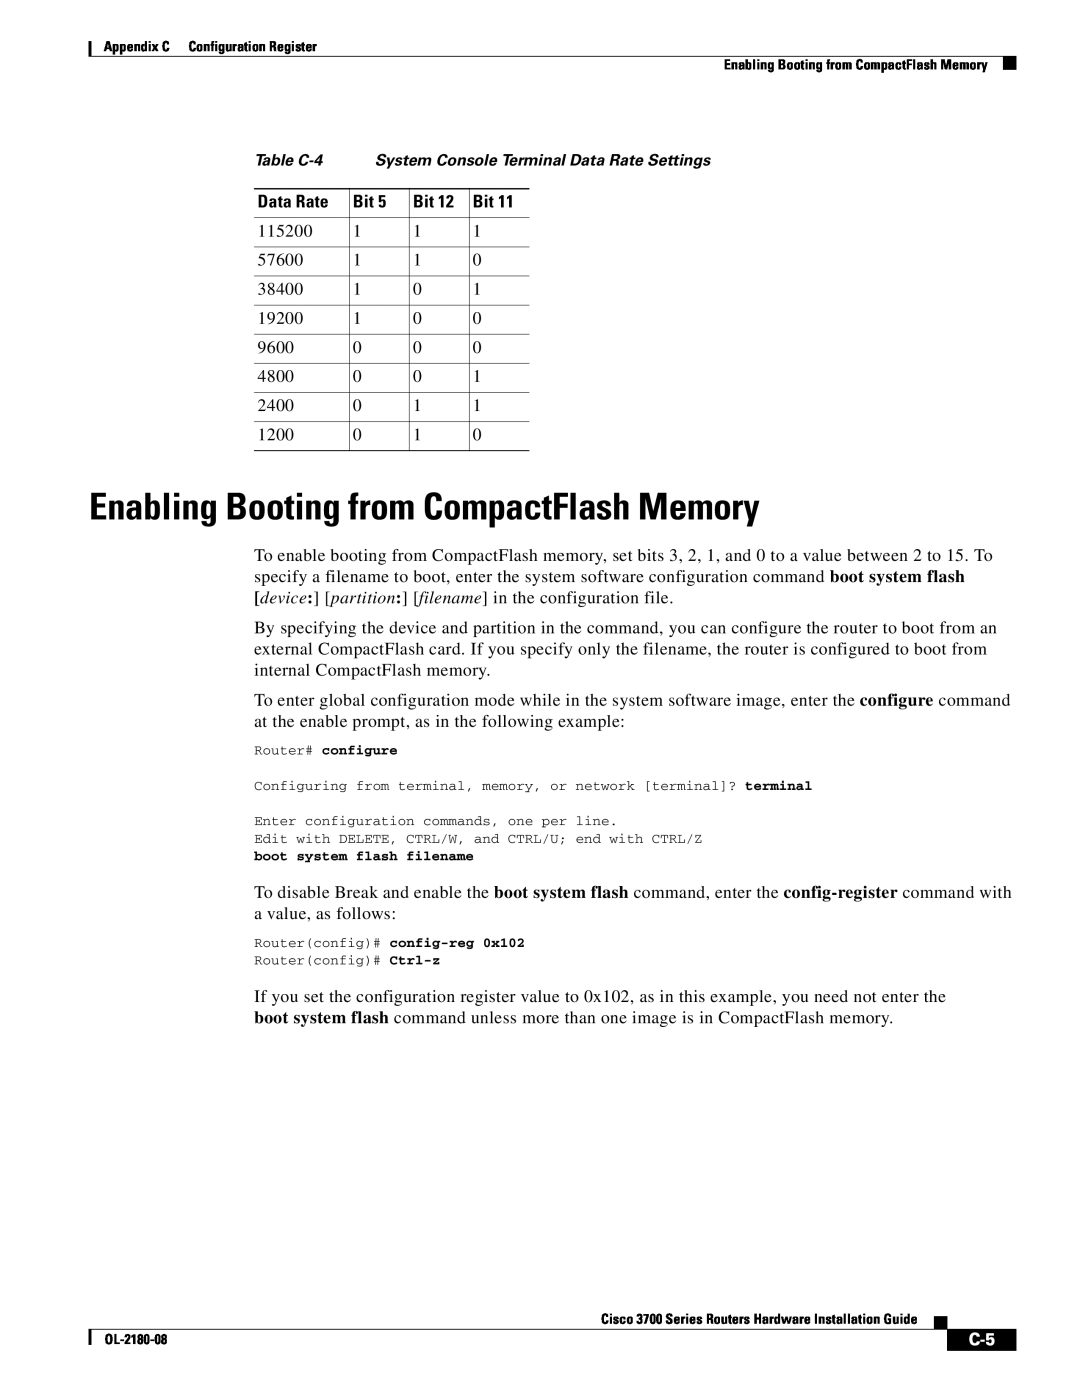 Cisco Systems 3700 Series manual Enabling Booting from CompactFlash Memory 